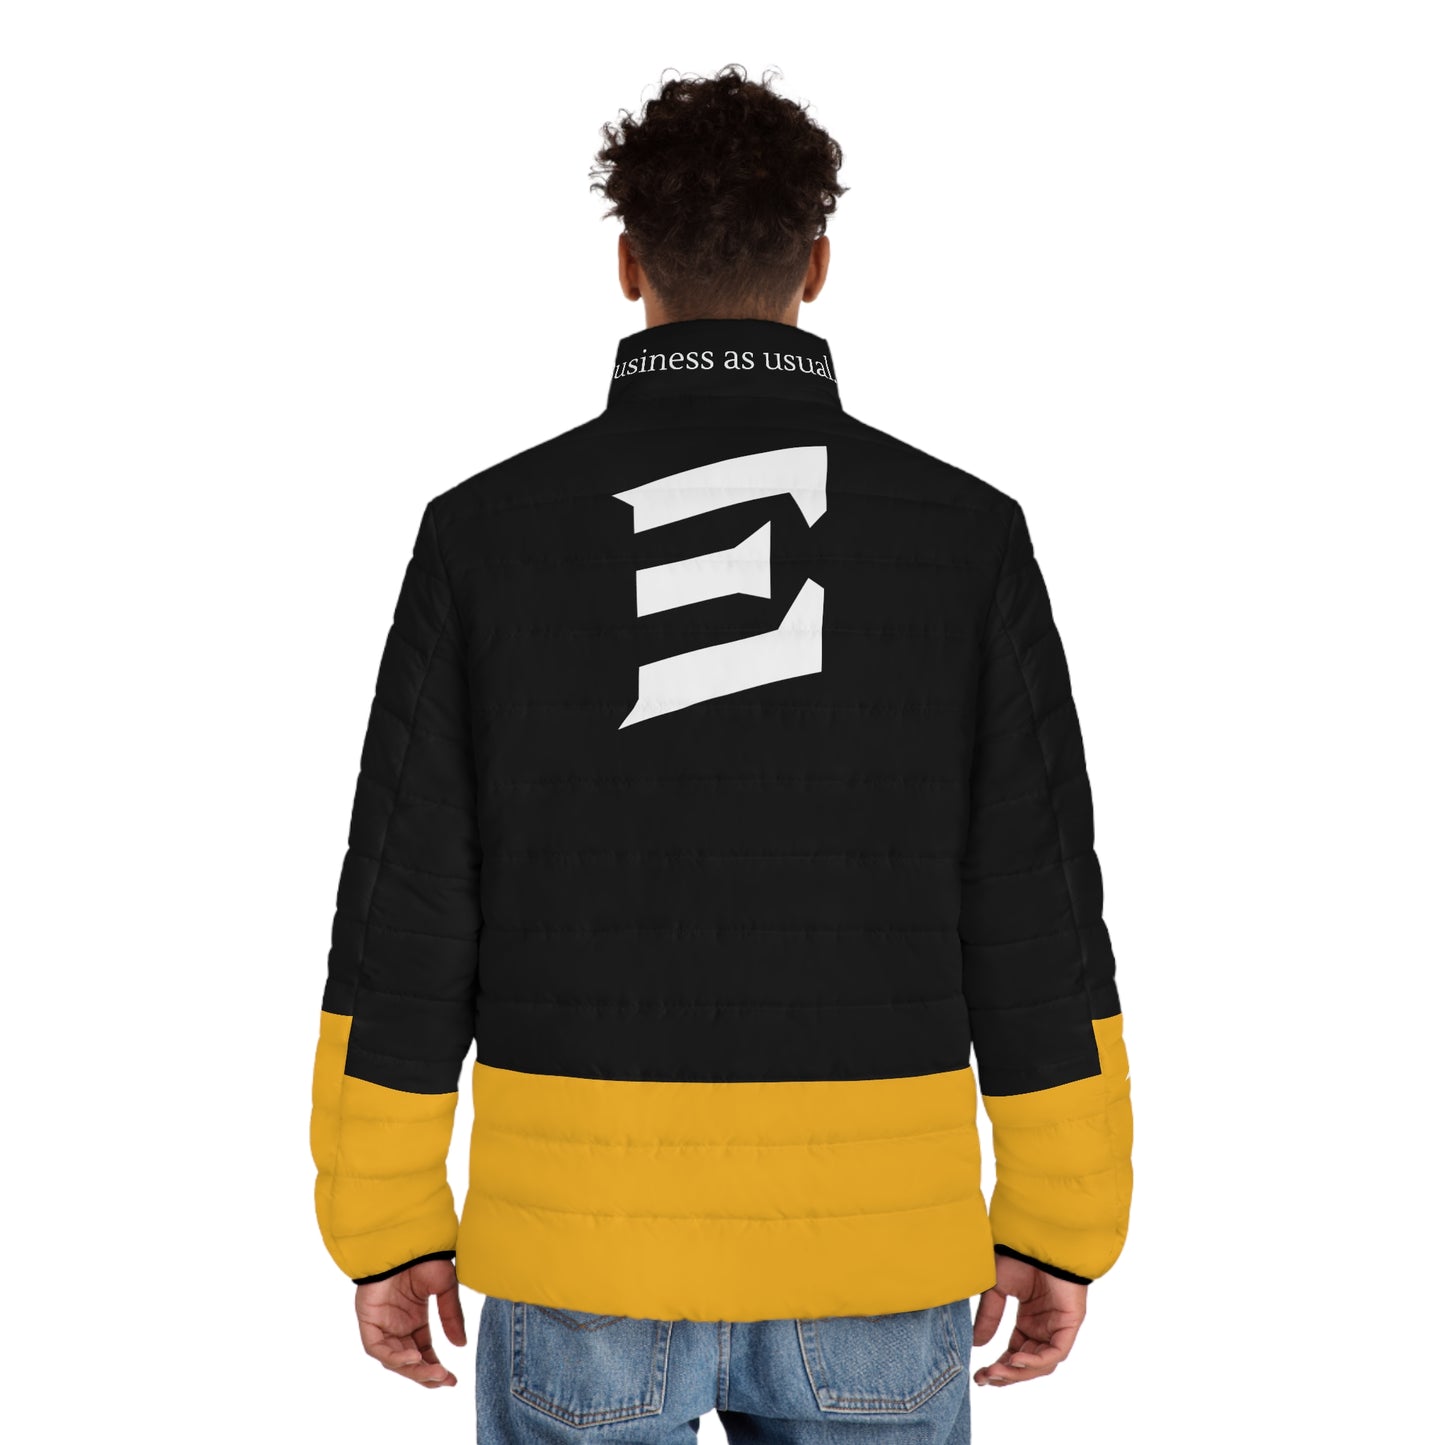 Entrepreneur Black/Gold Puffer Jacket (Fall Collection)